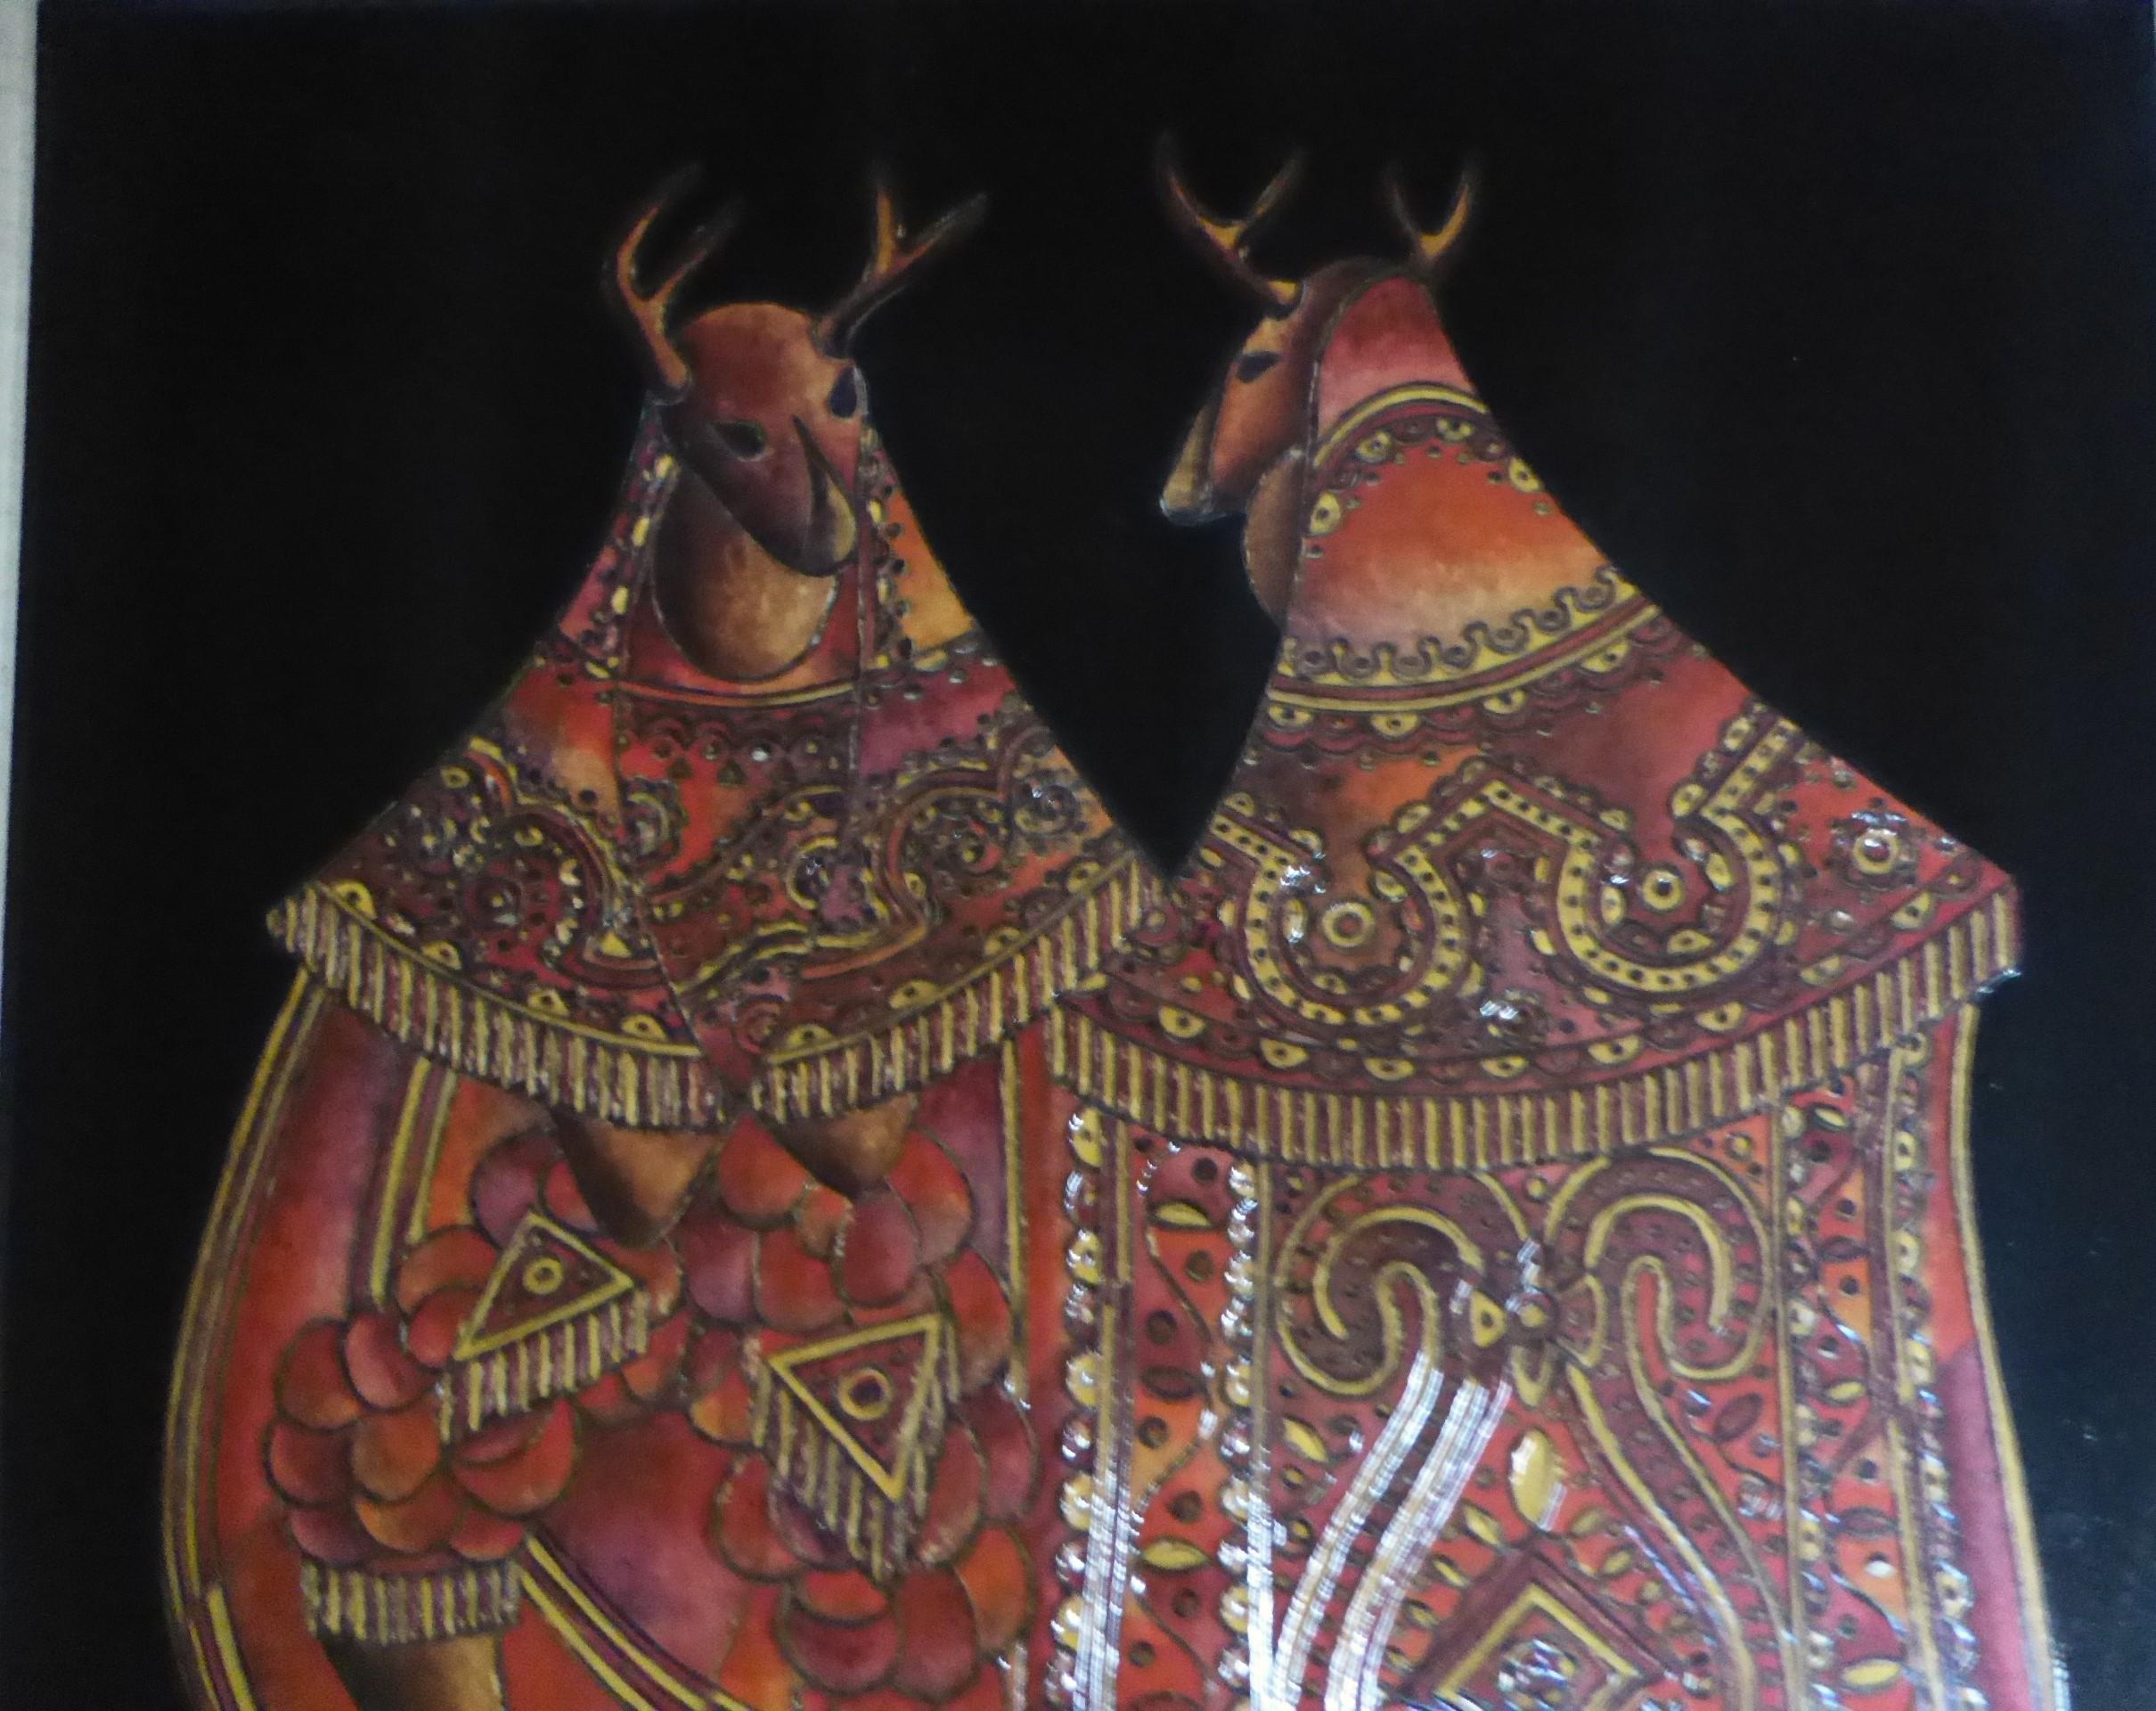 This unique artwork by David Ordoñez, El Baile del Venado, depicts two celebrants in Deer costumes performing a folkloric and spirutual dance of the Mayans of Guatemala and Yaquis people of Mexico.  Framed.
Measurements: 23 inches wide x 25.5 inches